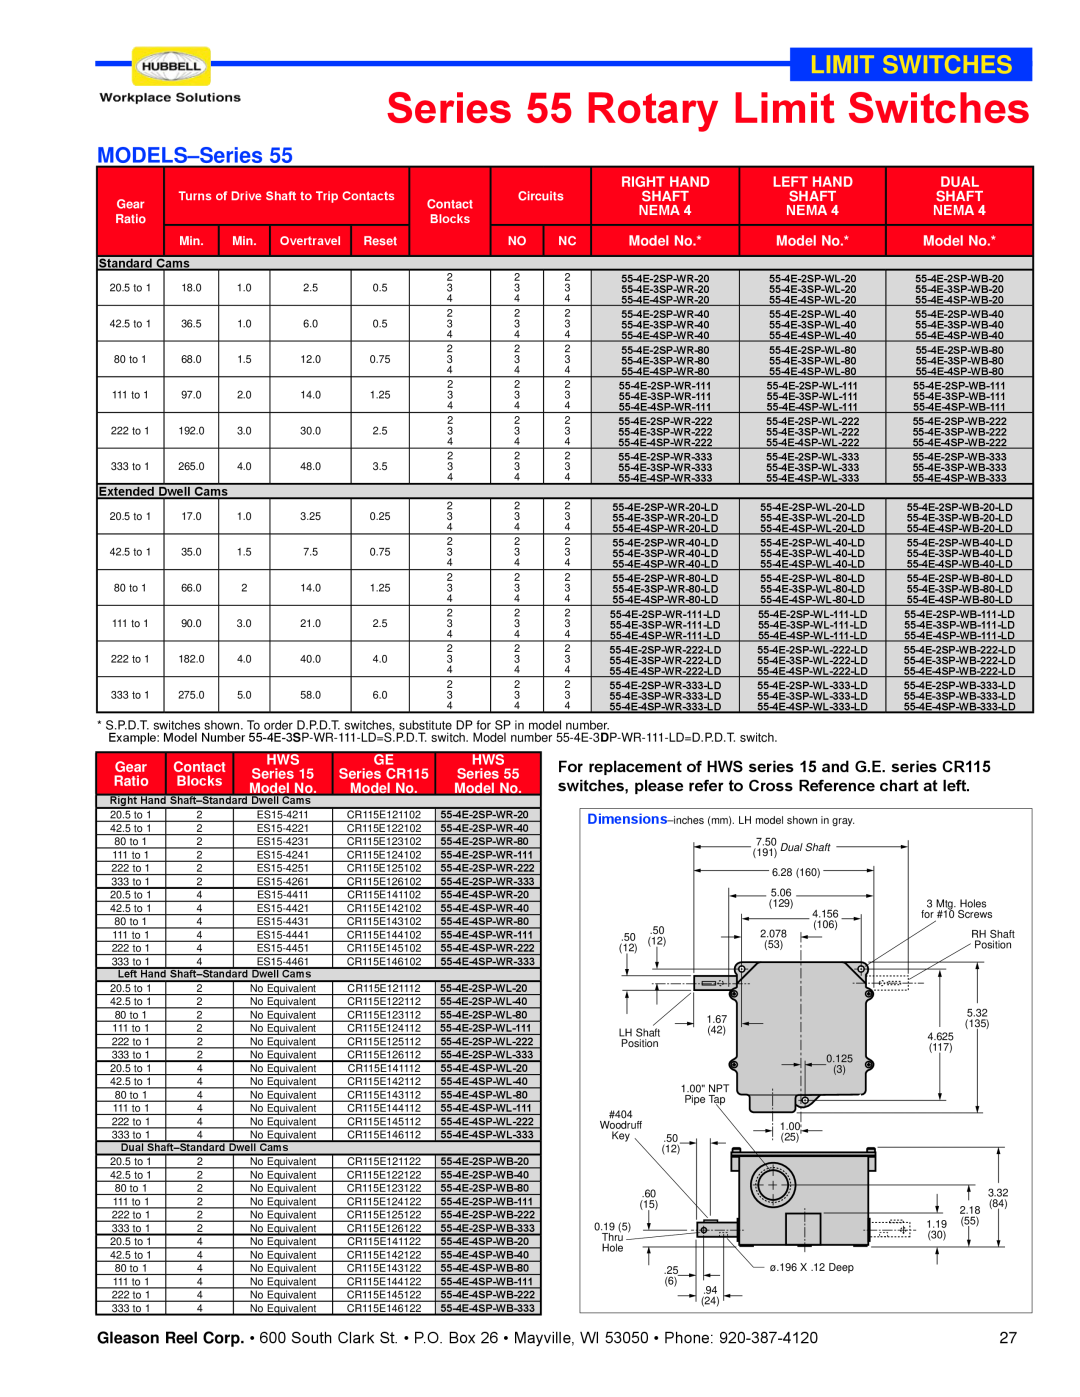 Hubbell specifications Series 55 Rotary Limit Switches, MODELS-Series, Right Hand, Left Hand, Dual, Shaft, Nema 